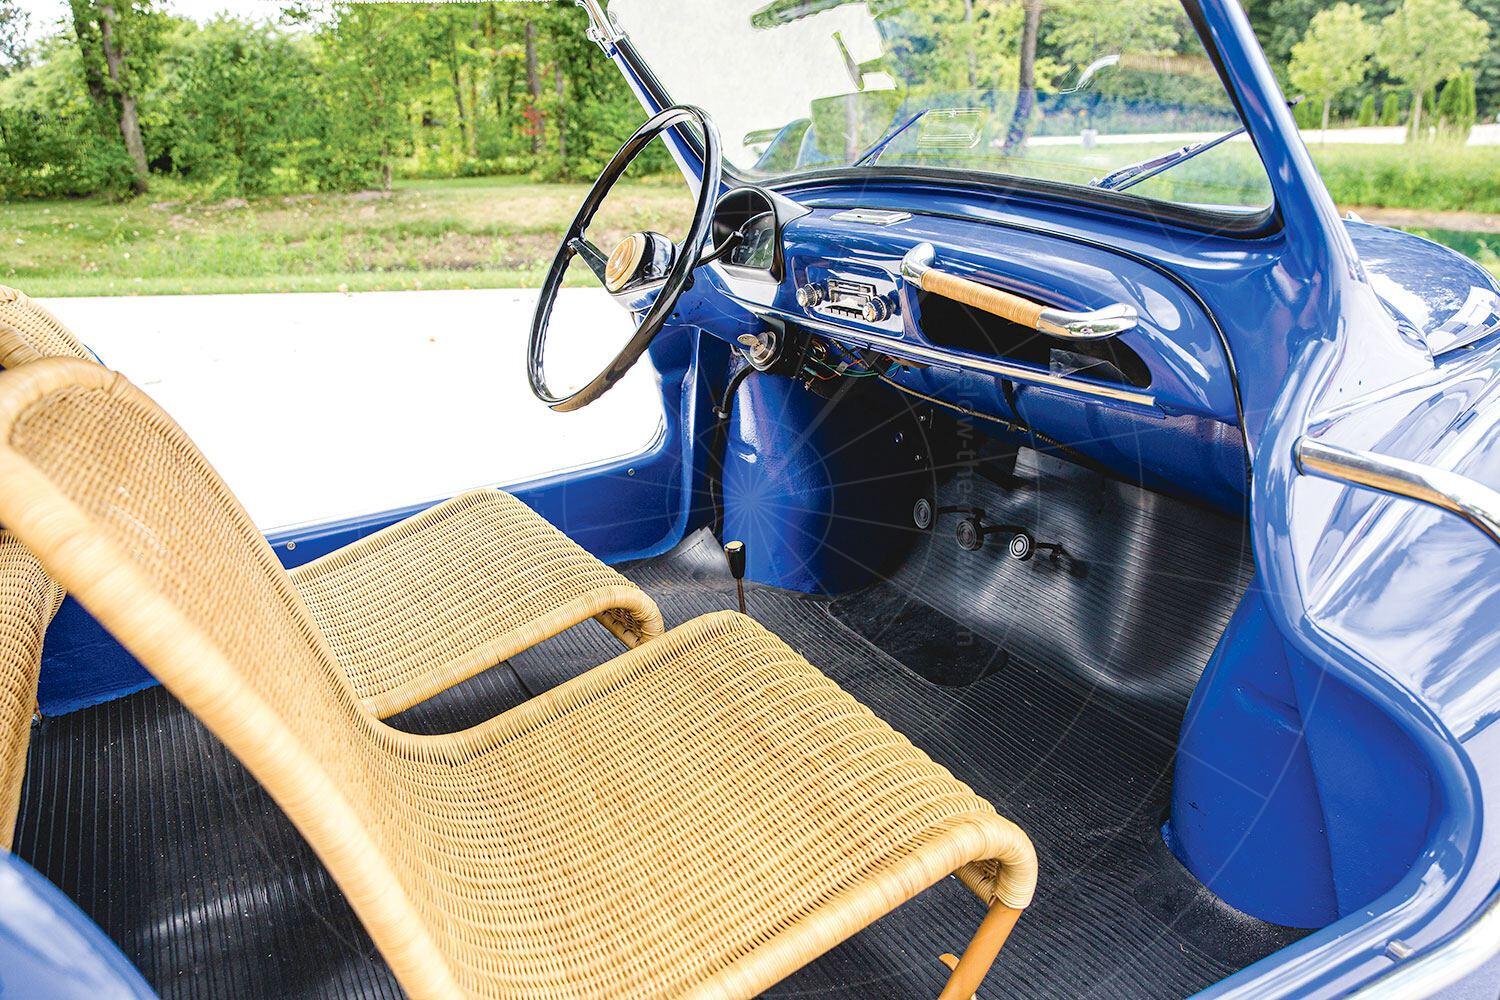 Renault 4CV Jolly interior Pic: RM Sotheby's | Renault 4CV Jolly interior